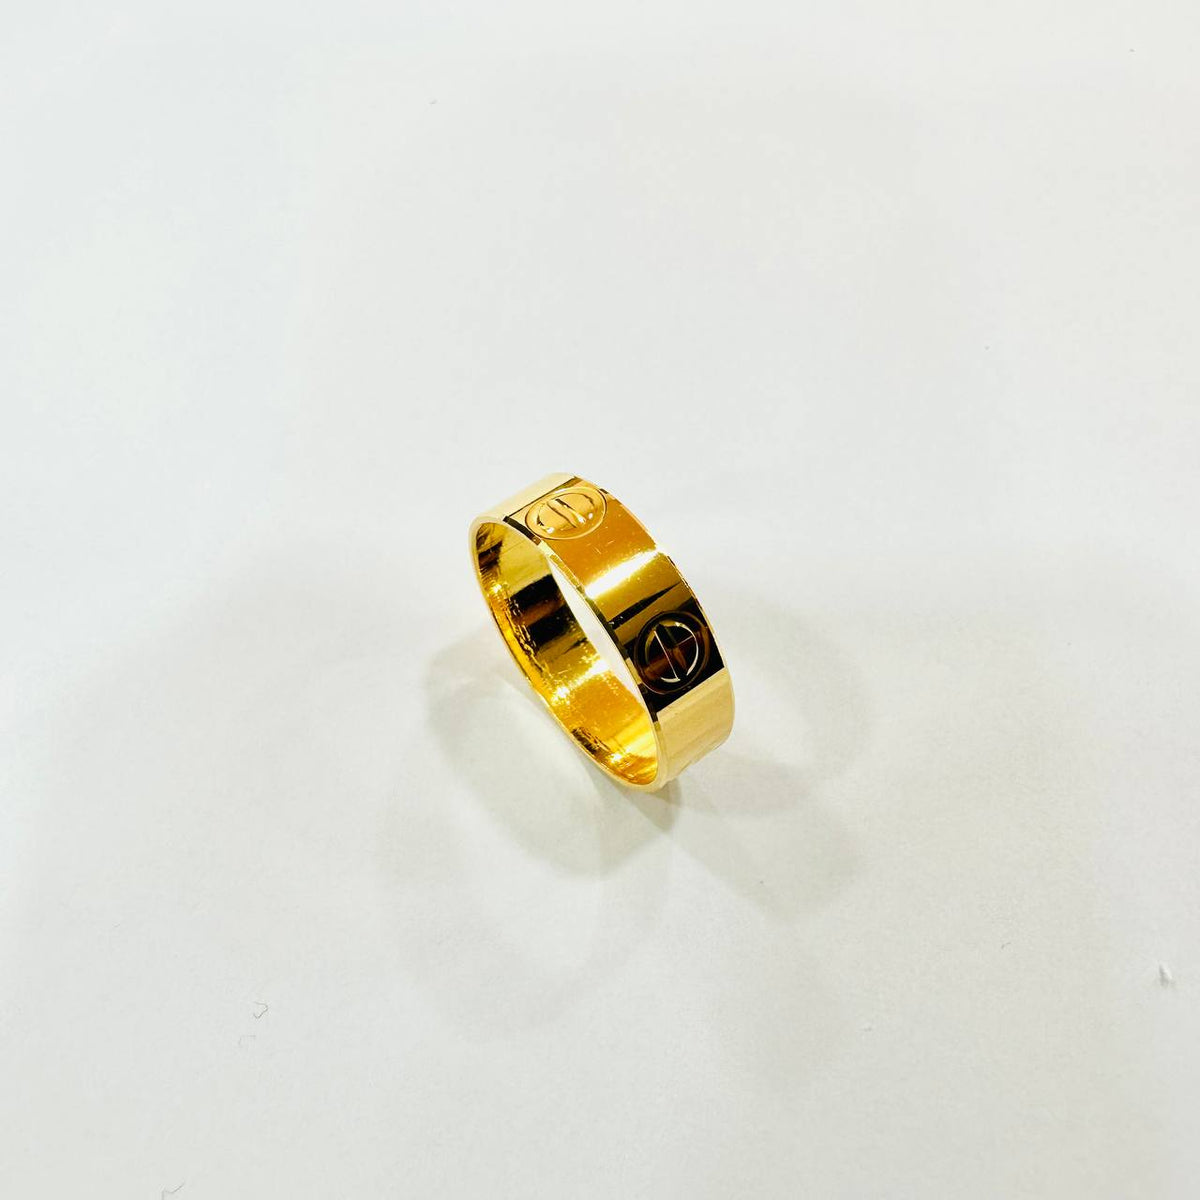 Gold Ring Singapore | Buy Gold Ring Singapore – Best Gold Shop